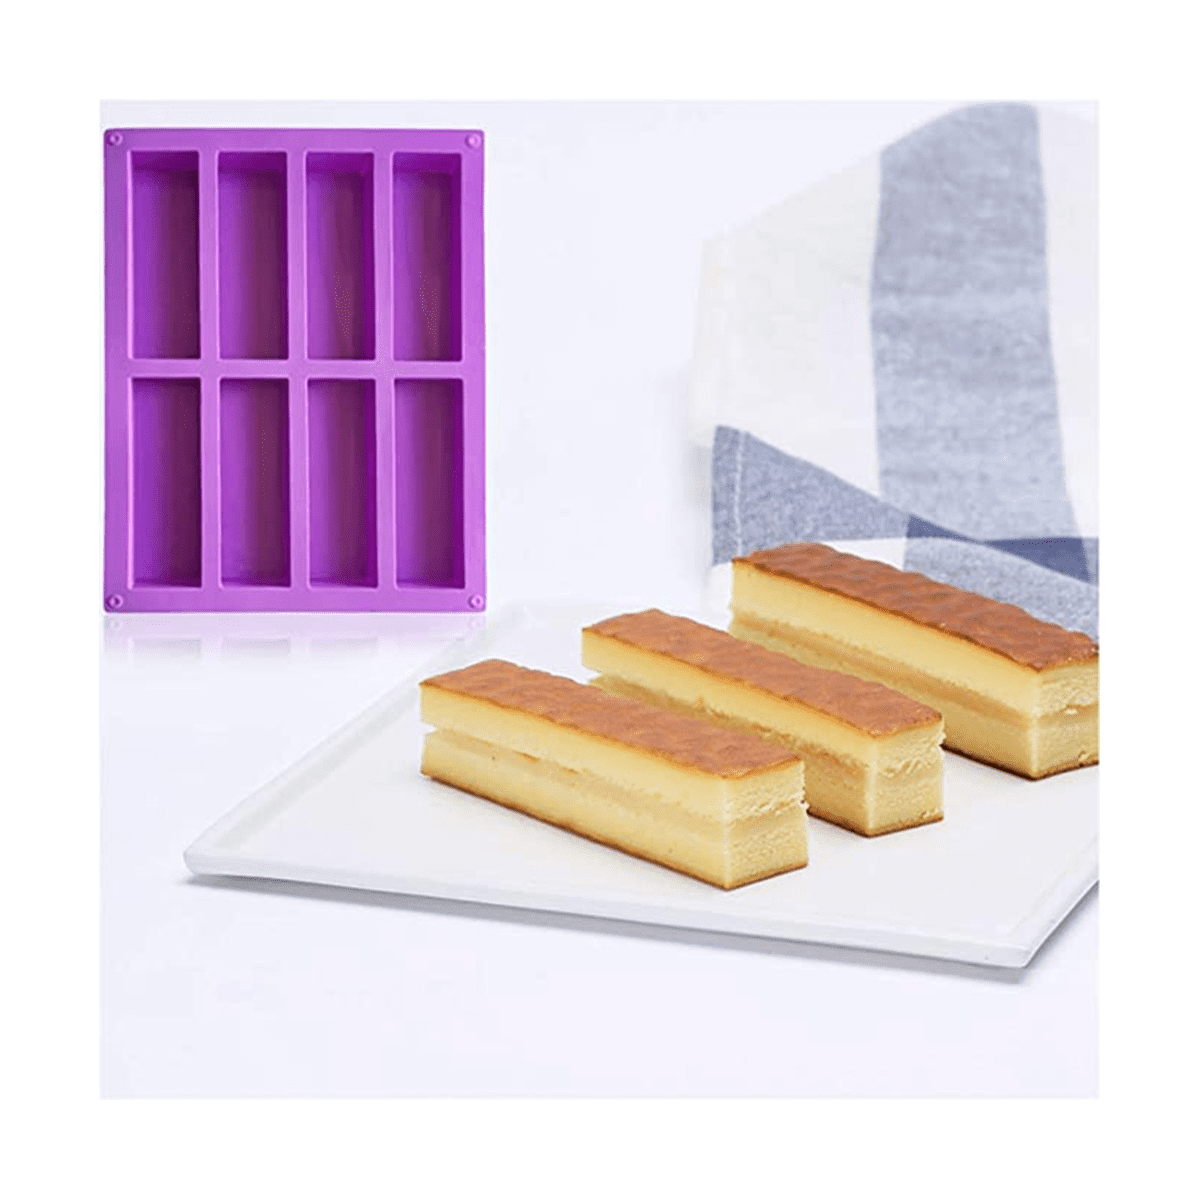 Small Butter Mold Molds Plastic Baking Moldss Silicone Cake Cup Mould 4  Grid For Soap Bar Winkie,Energy Bar, Muffin, Cornbread, Cheesecake,  PAD11523 From Ports_shoes, $4.19